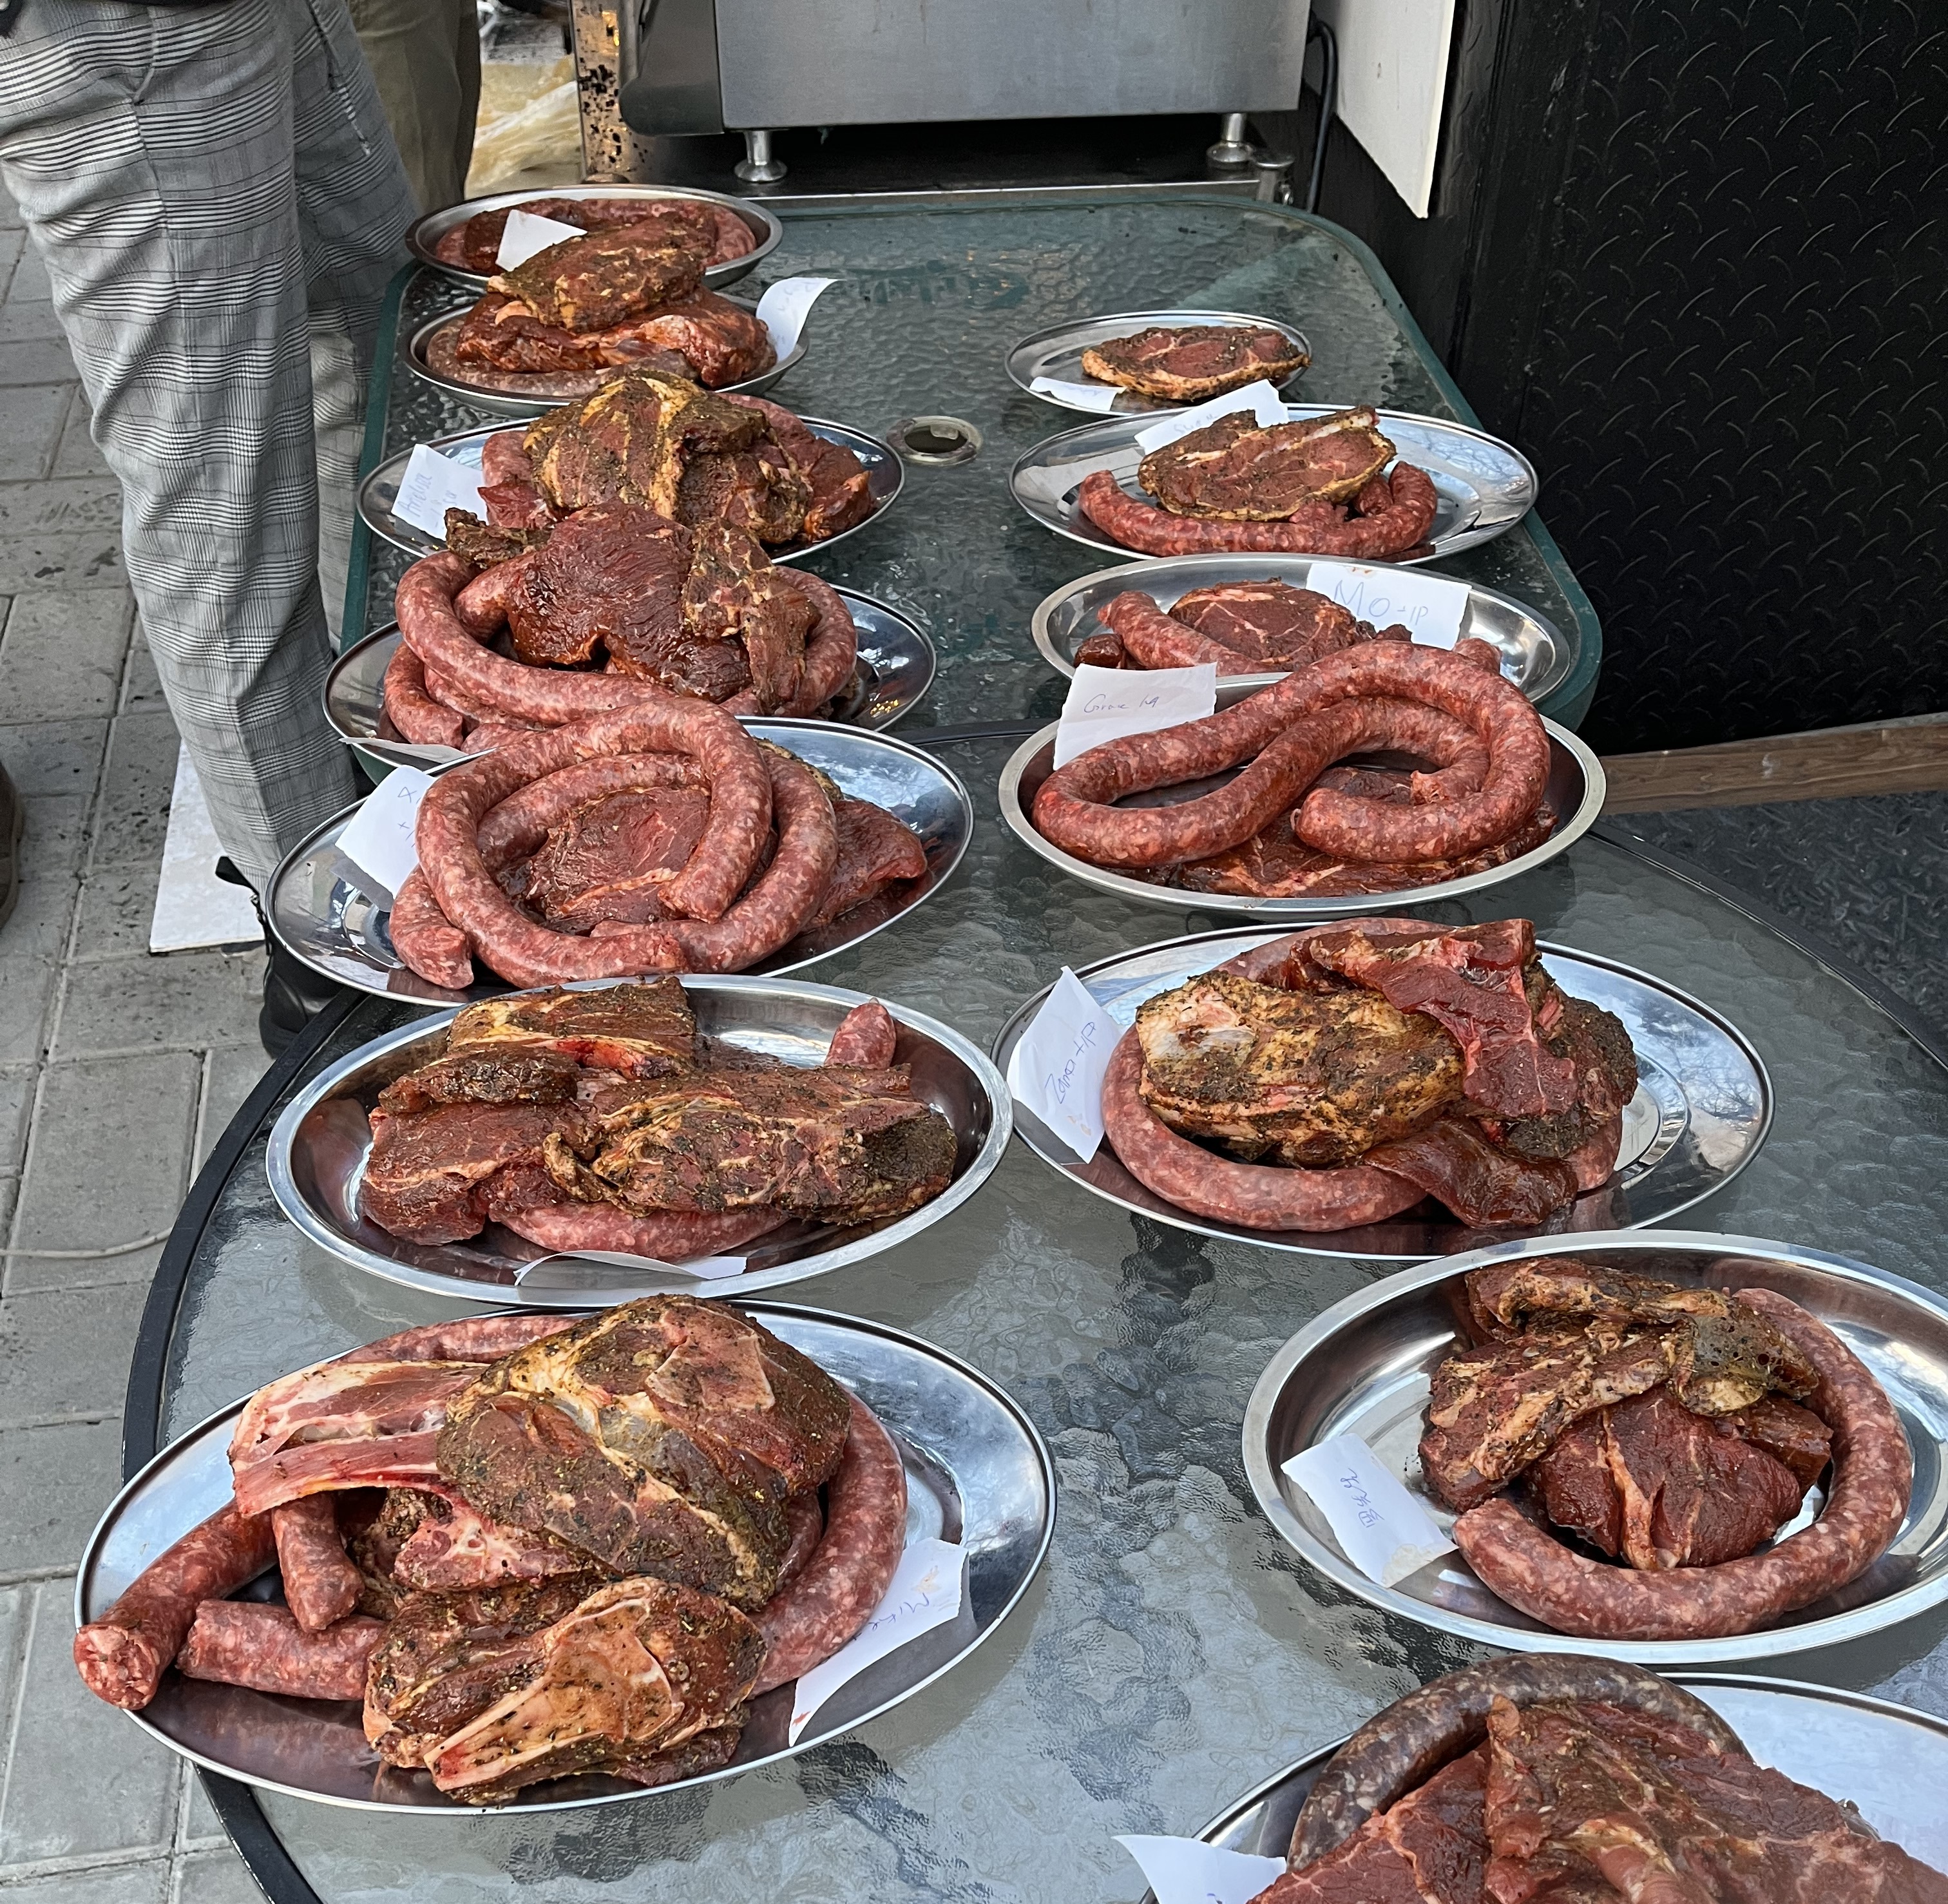 Cuts of meat and boerewors – spicy sausages from South Africa - are ready to go on a grill in Beijing. /CGTN 